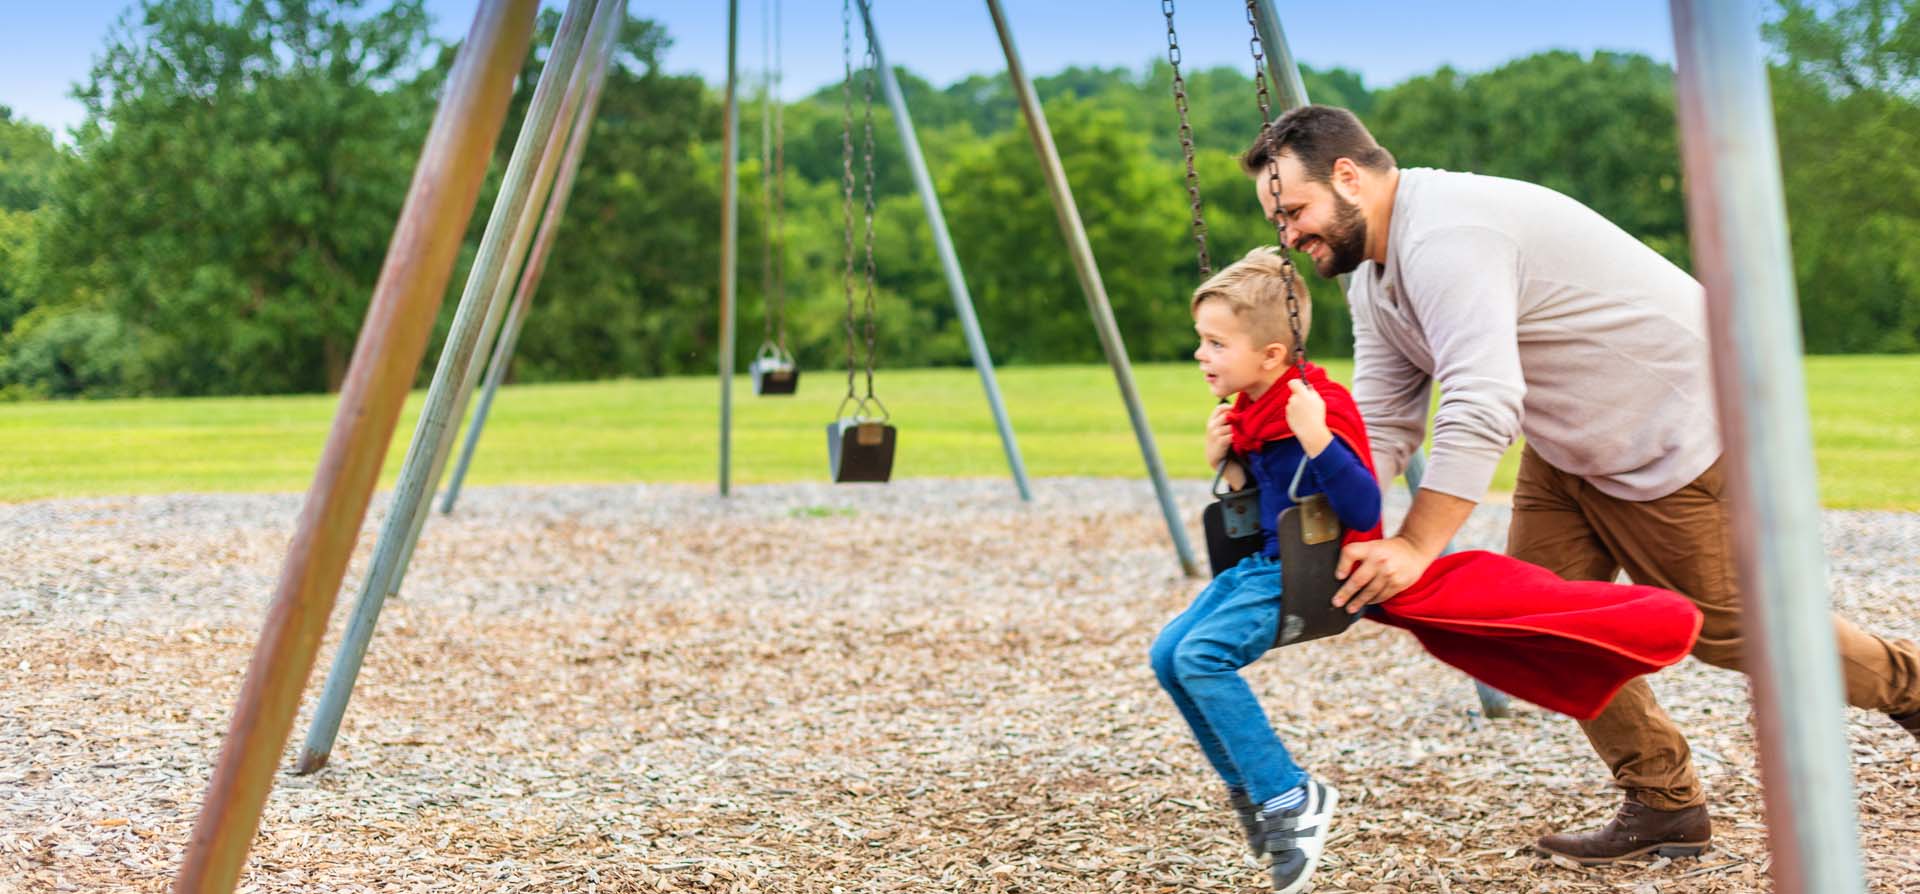 father and son on swing